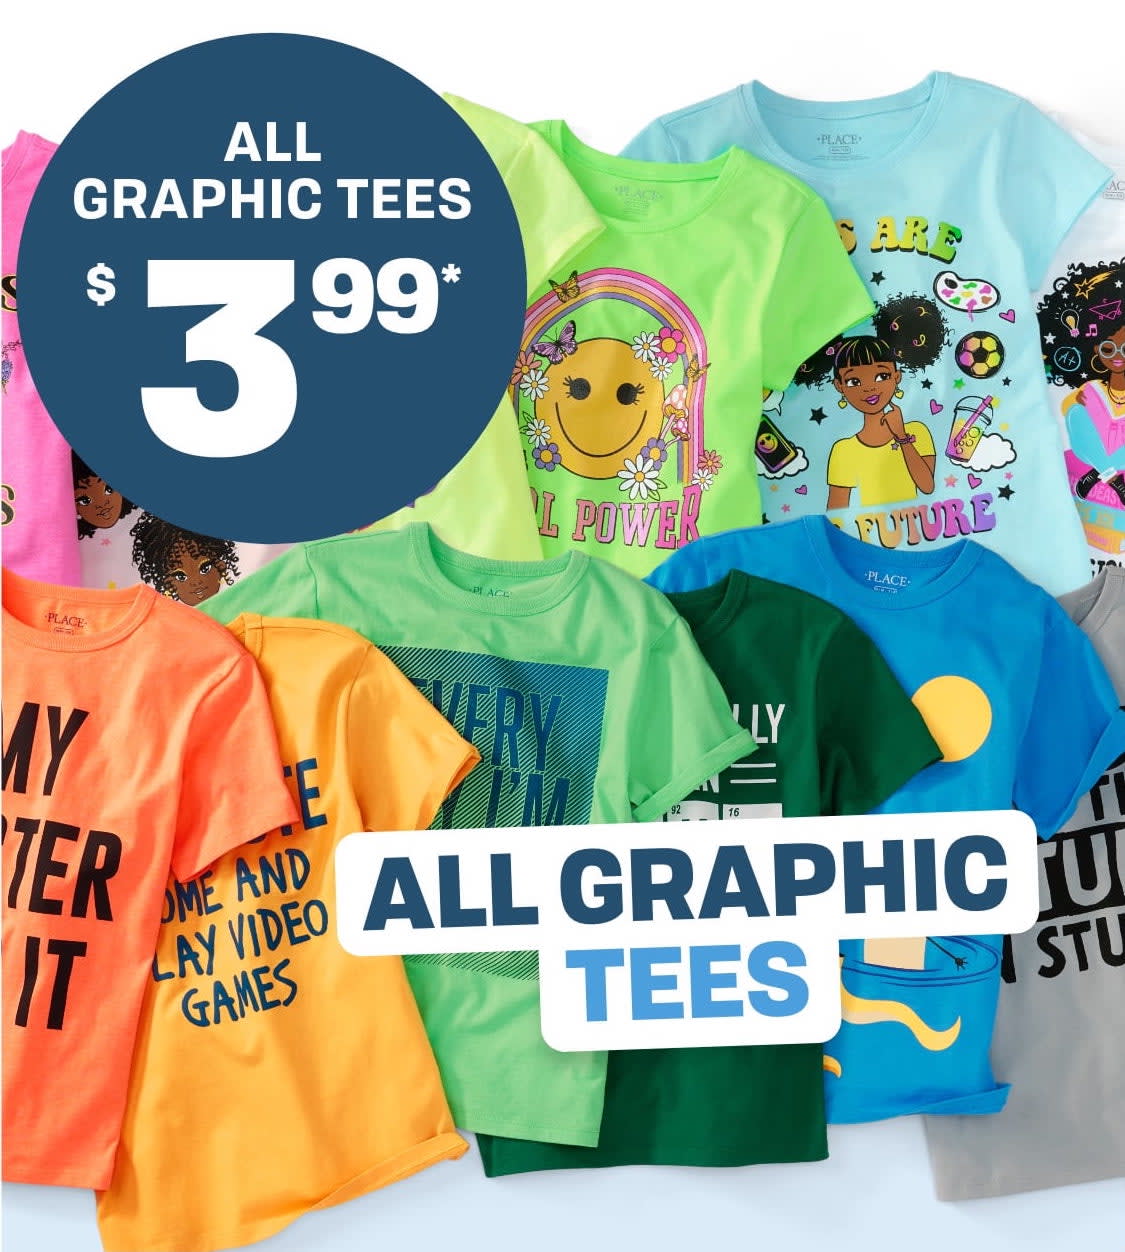 ALL GRAPHIC TEES | $3.99*